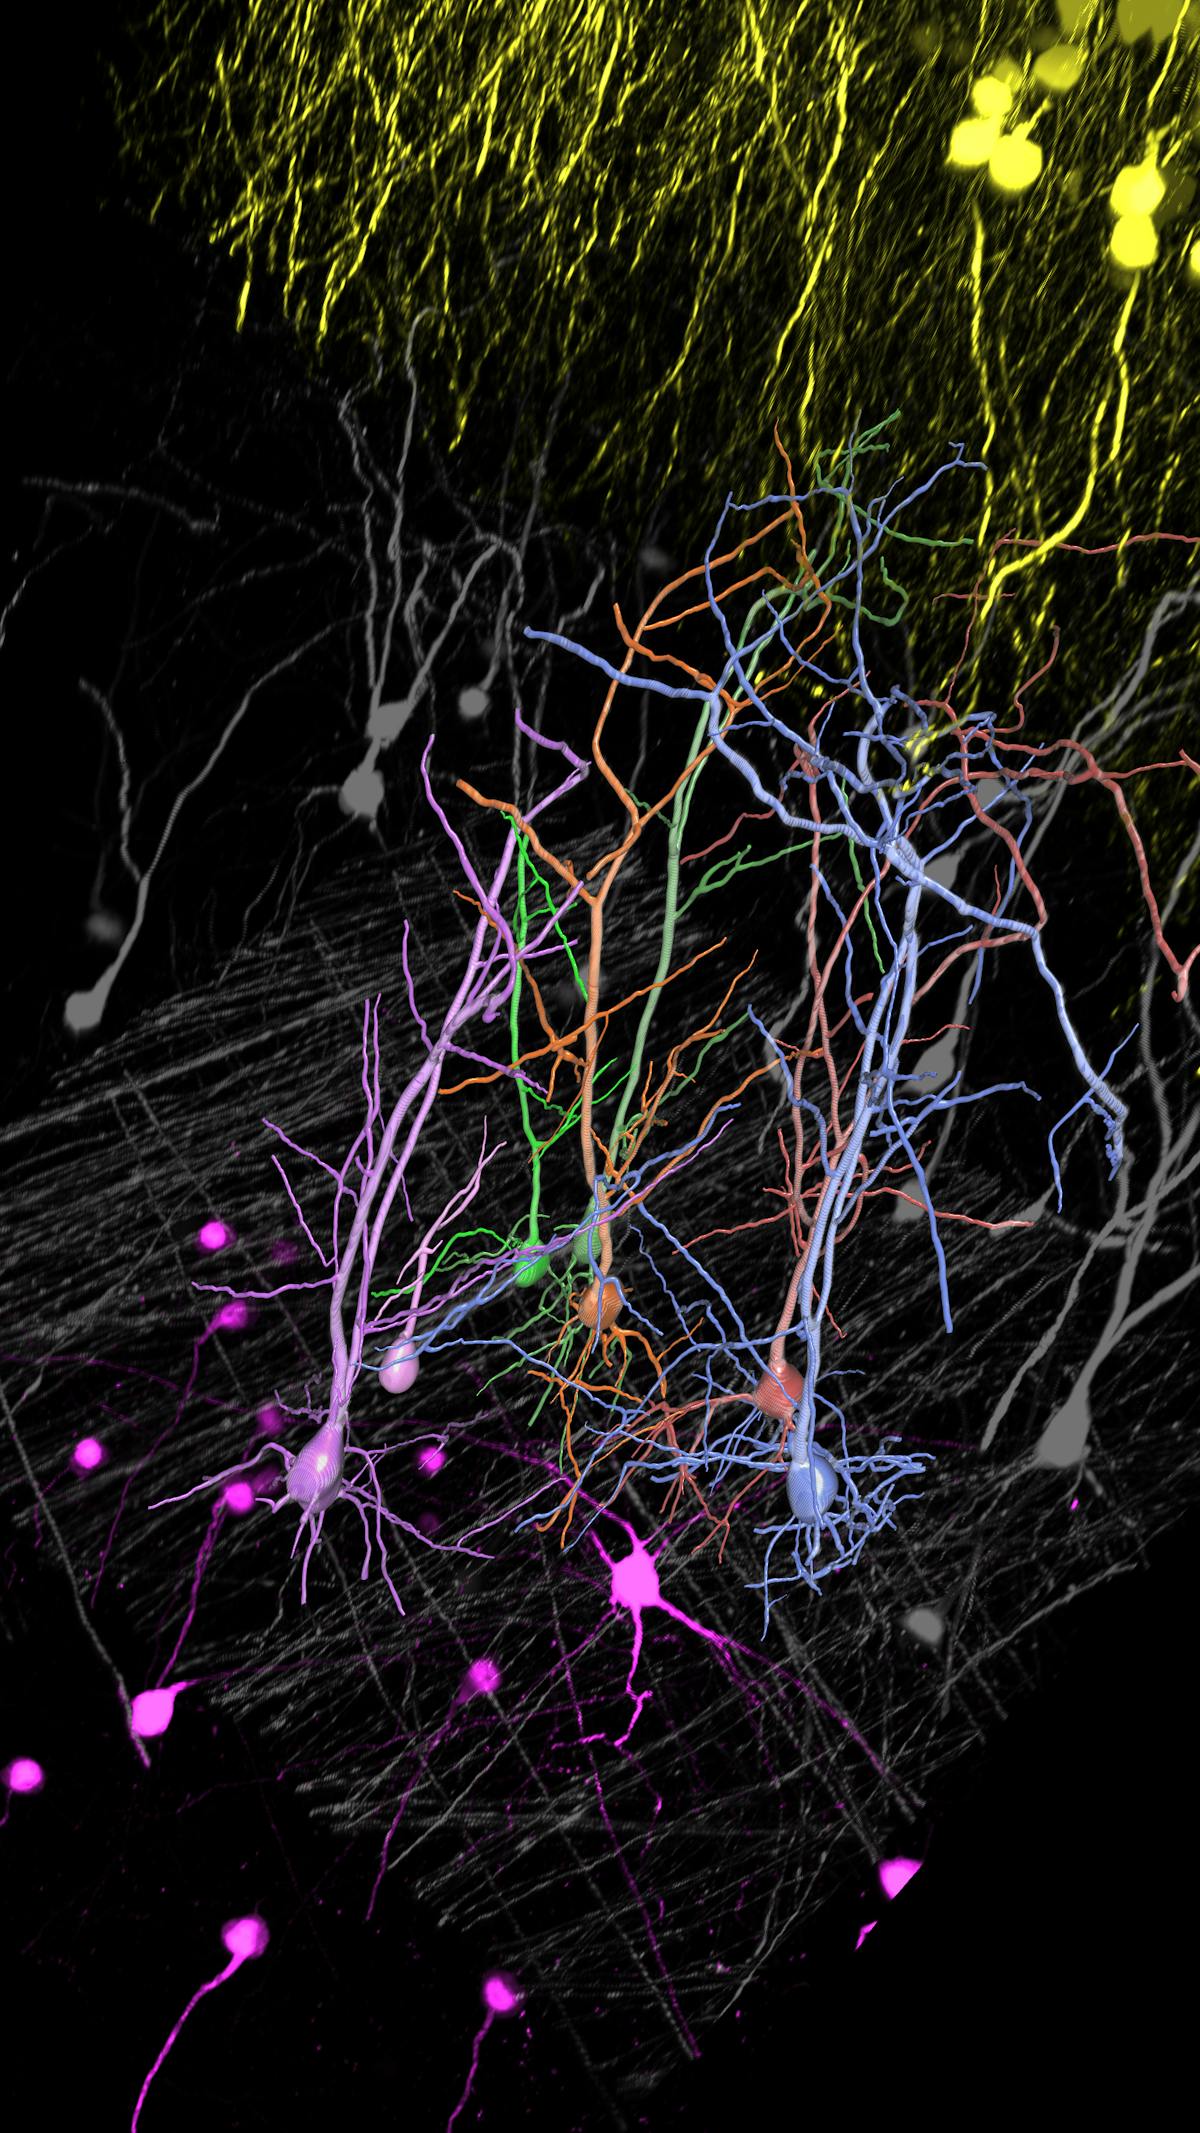 FIGURE 4. THY1-EGFP labeled neuron in whole mouse brain processed using the PEGASOS 2 tissue clearing method, imaged on a Leica confocal microscope. Neurons were traced using Aivia&rsquo;s 3D Neuron Analysis&ndash;FL recipe from Leica Microsystems.